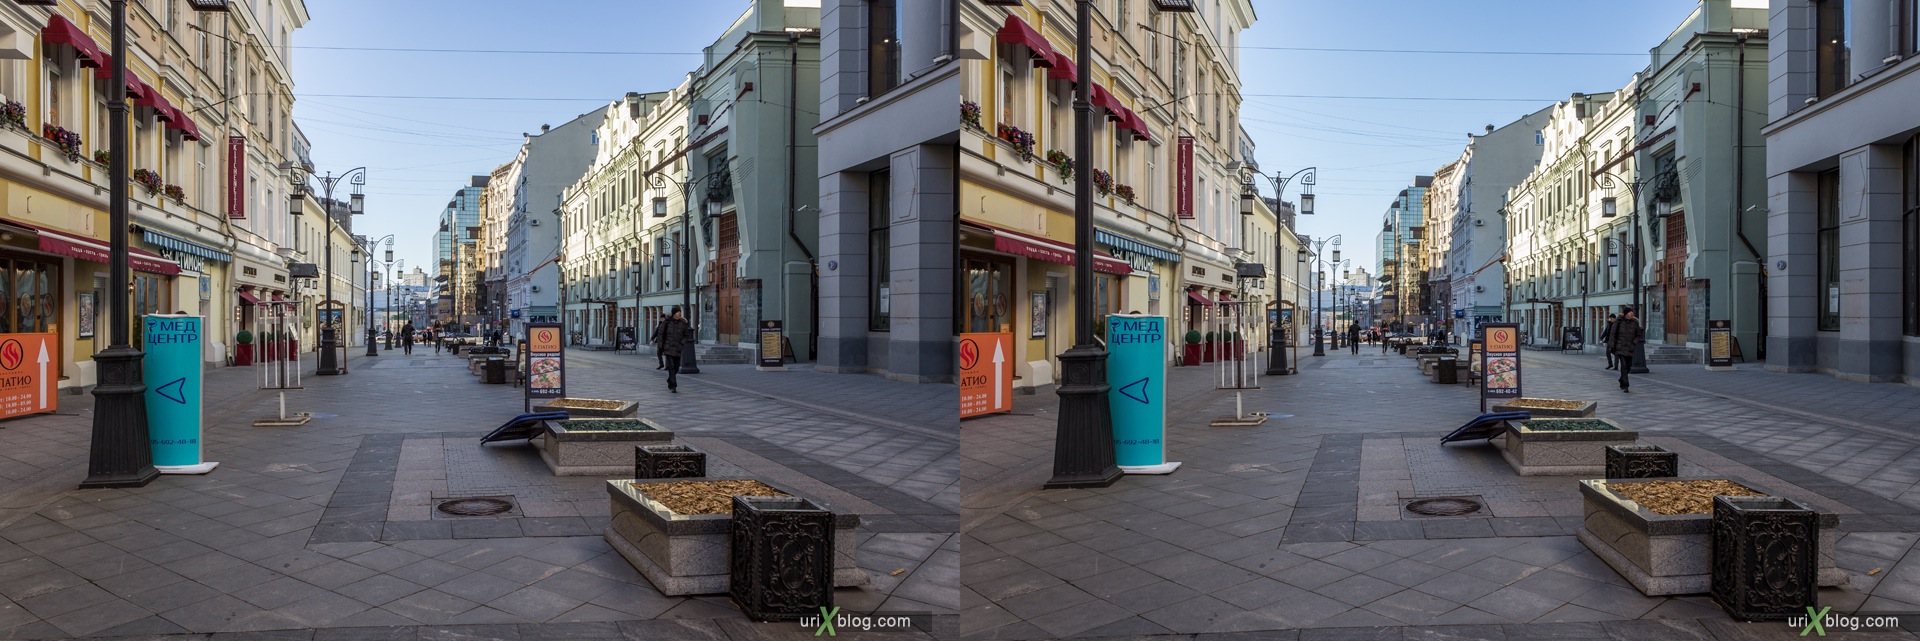 2013, Moscow, Russia, Kamergersky alley, street, new pedestrian zone, 3D, stereo pair, cross-eyed, crossview, cross view stereo pair, stereoscopic